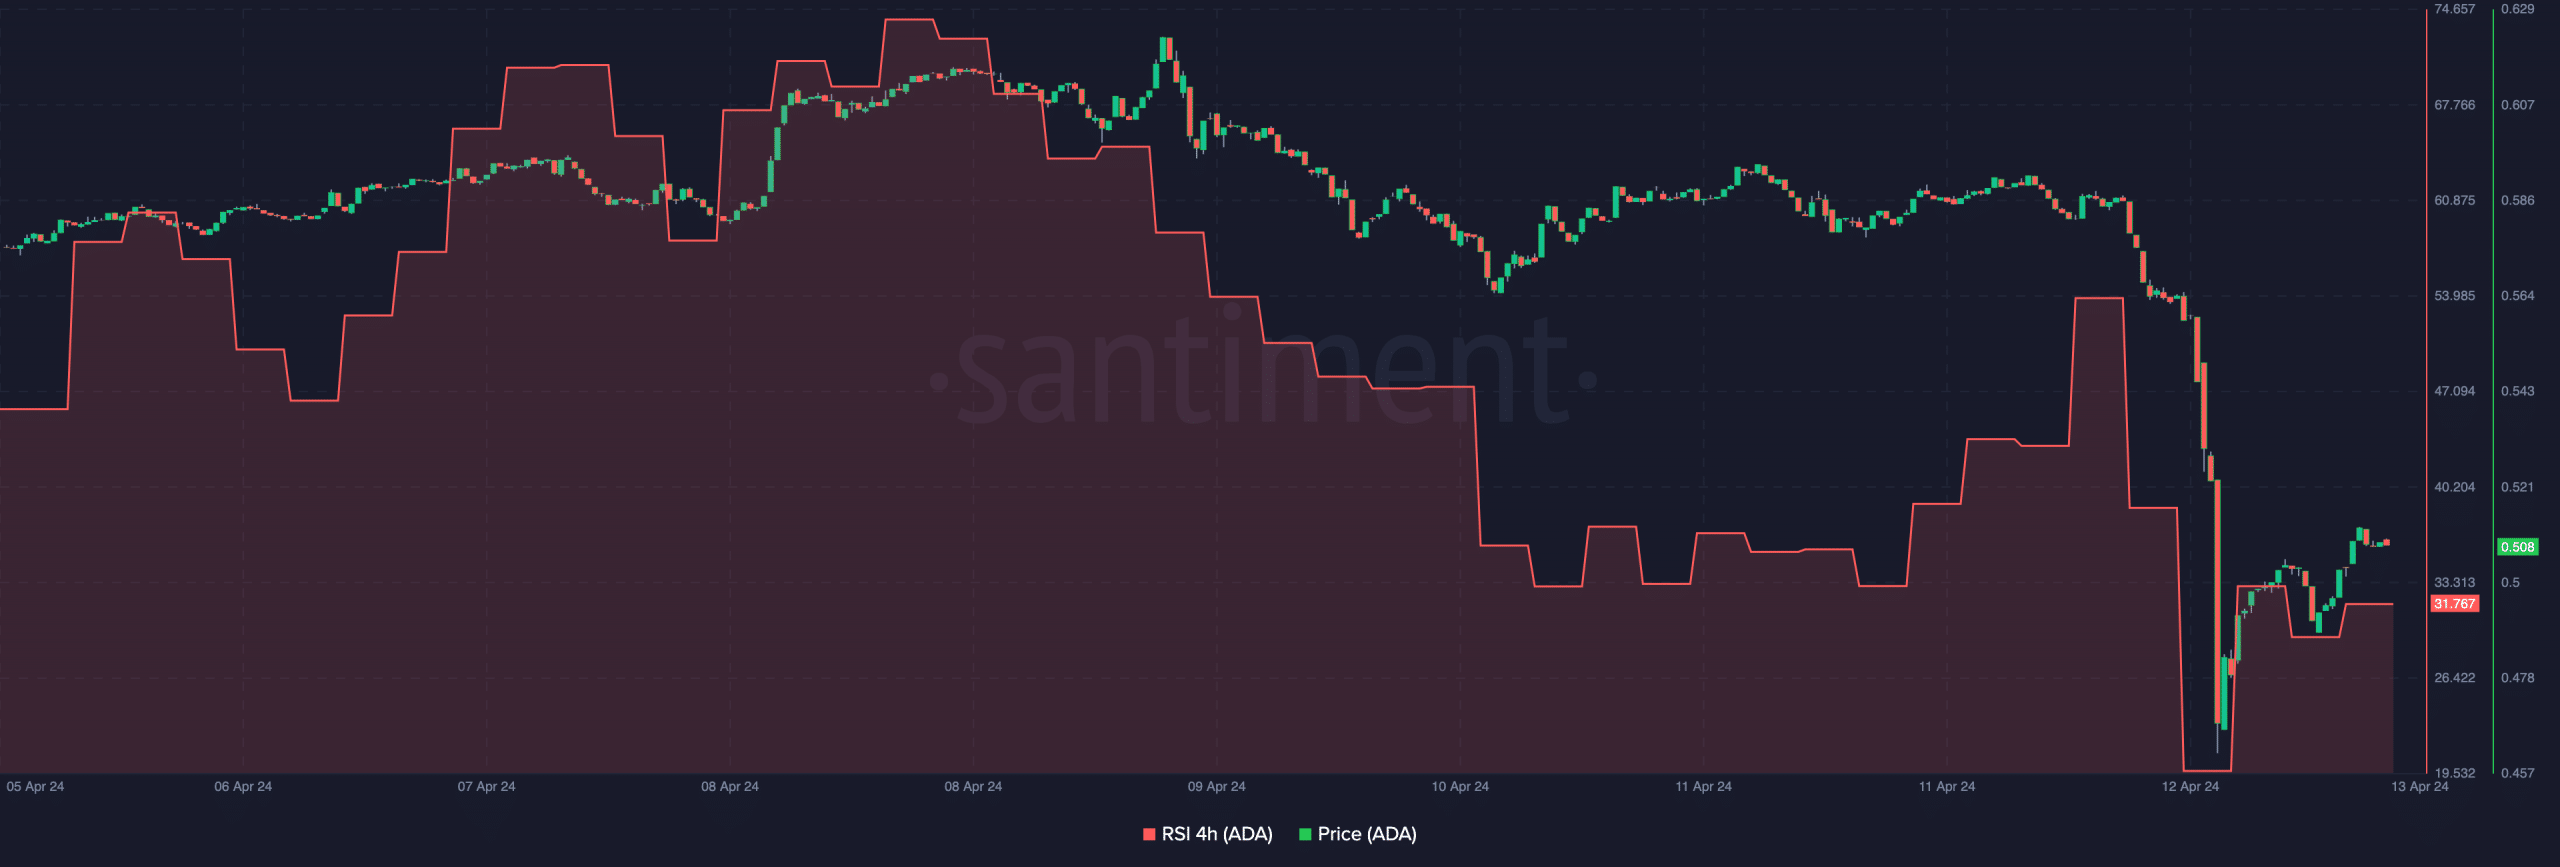 Cardano's price showing how the token was oversold